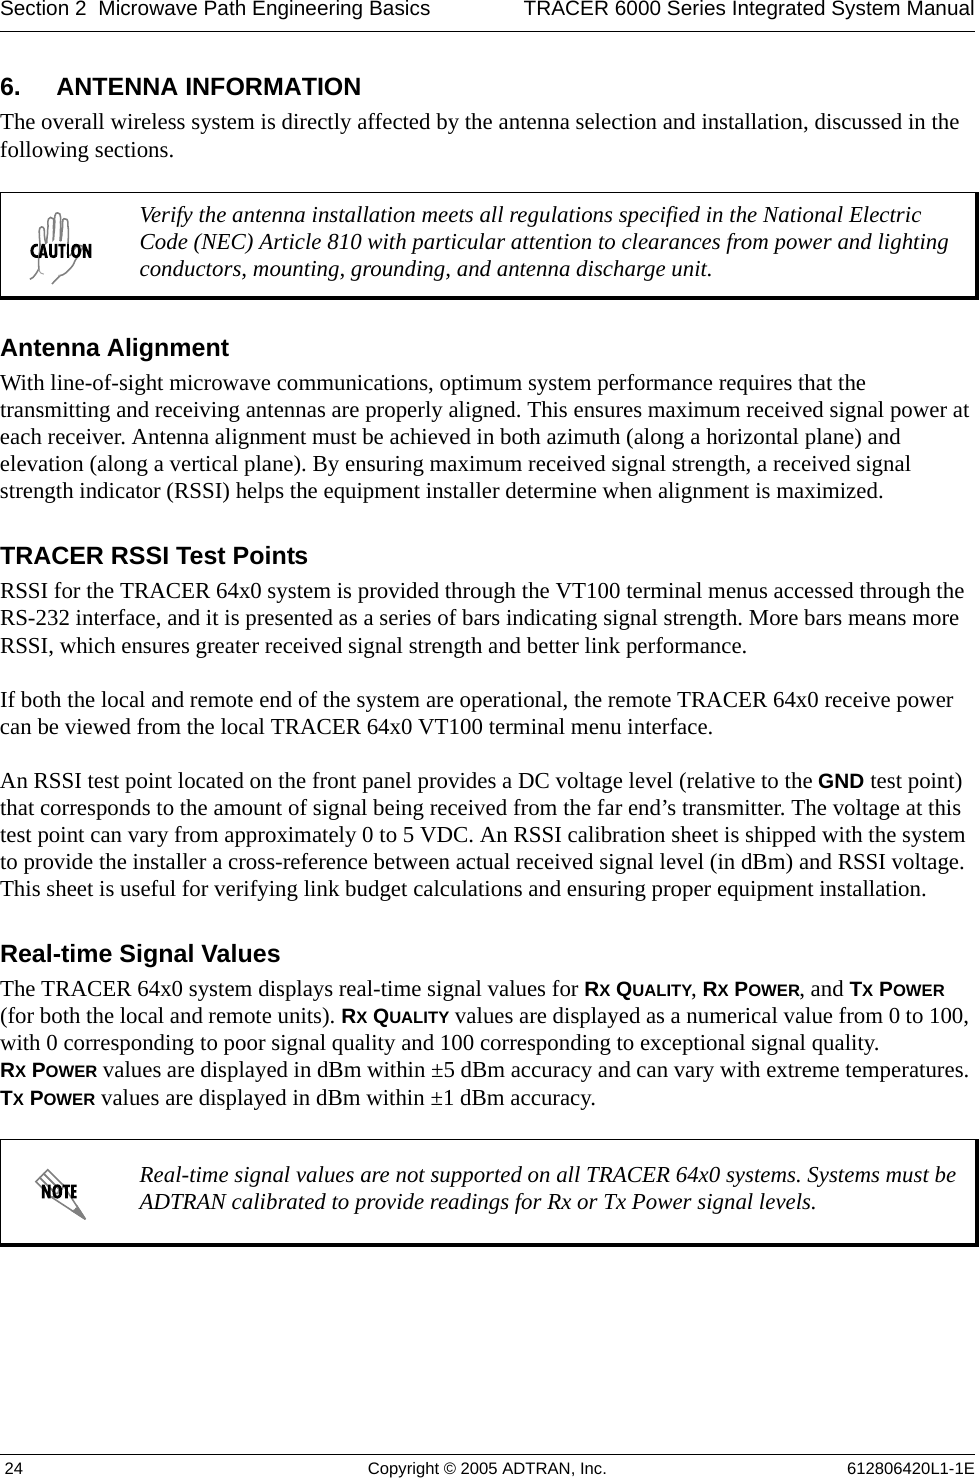 Section 2  Microwave Path Engineering Basics TRACER 6000 Series Integrated System Manual 24 Copyright © 2005 ADTRAN, Inc. 612806420L1-1E6. ANTENNA INFORMATIONThe overall wireless system is directly affected by the antenna selection and installation, discussed in the following sections.Antenna AlignmentWith line-of-sight microwave communications, optimum system performance requires that the transmitting and receiving antennas are properly aligned. This ensures maximum received signal power at each receiver. Antenna alignment must be achieved in both azimuth (along a horizontal plane) and elevation (along a vertical plane). By ensuring maximum received signal strength, a received signal strength indicator (RSSI) helps the equipment installer determine when alignment is maximized. TRACER RSSI Test PointsRSSI for the TRACER 64x0 system is provided through the VT100 terminal menus accessed through the RS-232 interface, and it is presented as a series of bars indicating signal strength. More bars means more RSSI, which ensures greater received signal strength and better link performance.If both the local and remote end of the system are operational, the remote TRACER 64x0 receive power can be viewed from the local TRACER 64x0 VT100 terminal menu interface.An RSSI test point located on the front panel provides a DC voltage level (relative to the GND test point) that corresponds to the amount of signal being received from the far end’s transmitter. The voltage at this test point can vary from approximately 0 to 5 VDC. An RSSI calibration sheet is shipped with the system to provide the installer a cross-reference between actual received signal level (in dBm) and RSSI voltage. This sheet is useful for verifying link budget calculations and ensuring proper equipment installation.Real-time Signal ValuesThe TRACER 64x0 system displays real-time signal values for RX QUALITY, RX POWER, and TX POWER (for both the local and remote units). RX QUALITY values are displayed as a numerical value from 0 to 100, with 0 corresponding to poor signal quality and 100 corresponding to exceptional signal quality. RX POWER values are displayed in dBm within ±5 dBm accuracy and can vary with extreme temperatures. TX POWER values are displayed in dBm within ±1 dBm accuracy. Verify the antenna installation meets all regulations specified in the National Electric Code (NEC) Article 810 with particular attention to clearances from power and lighting conductors, mounting, grounding, and antenna discharge unit.Real-time signal values are not supported on all TRACER 64x0 systems. Systems must be ADTRAN calibrated to provide readings for Rx or Tx Power signal levels. 